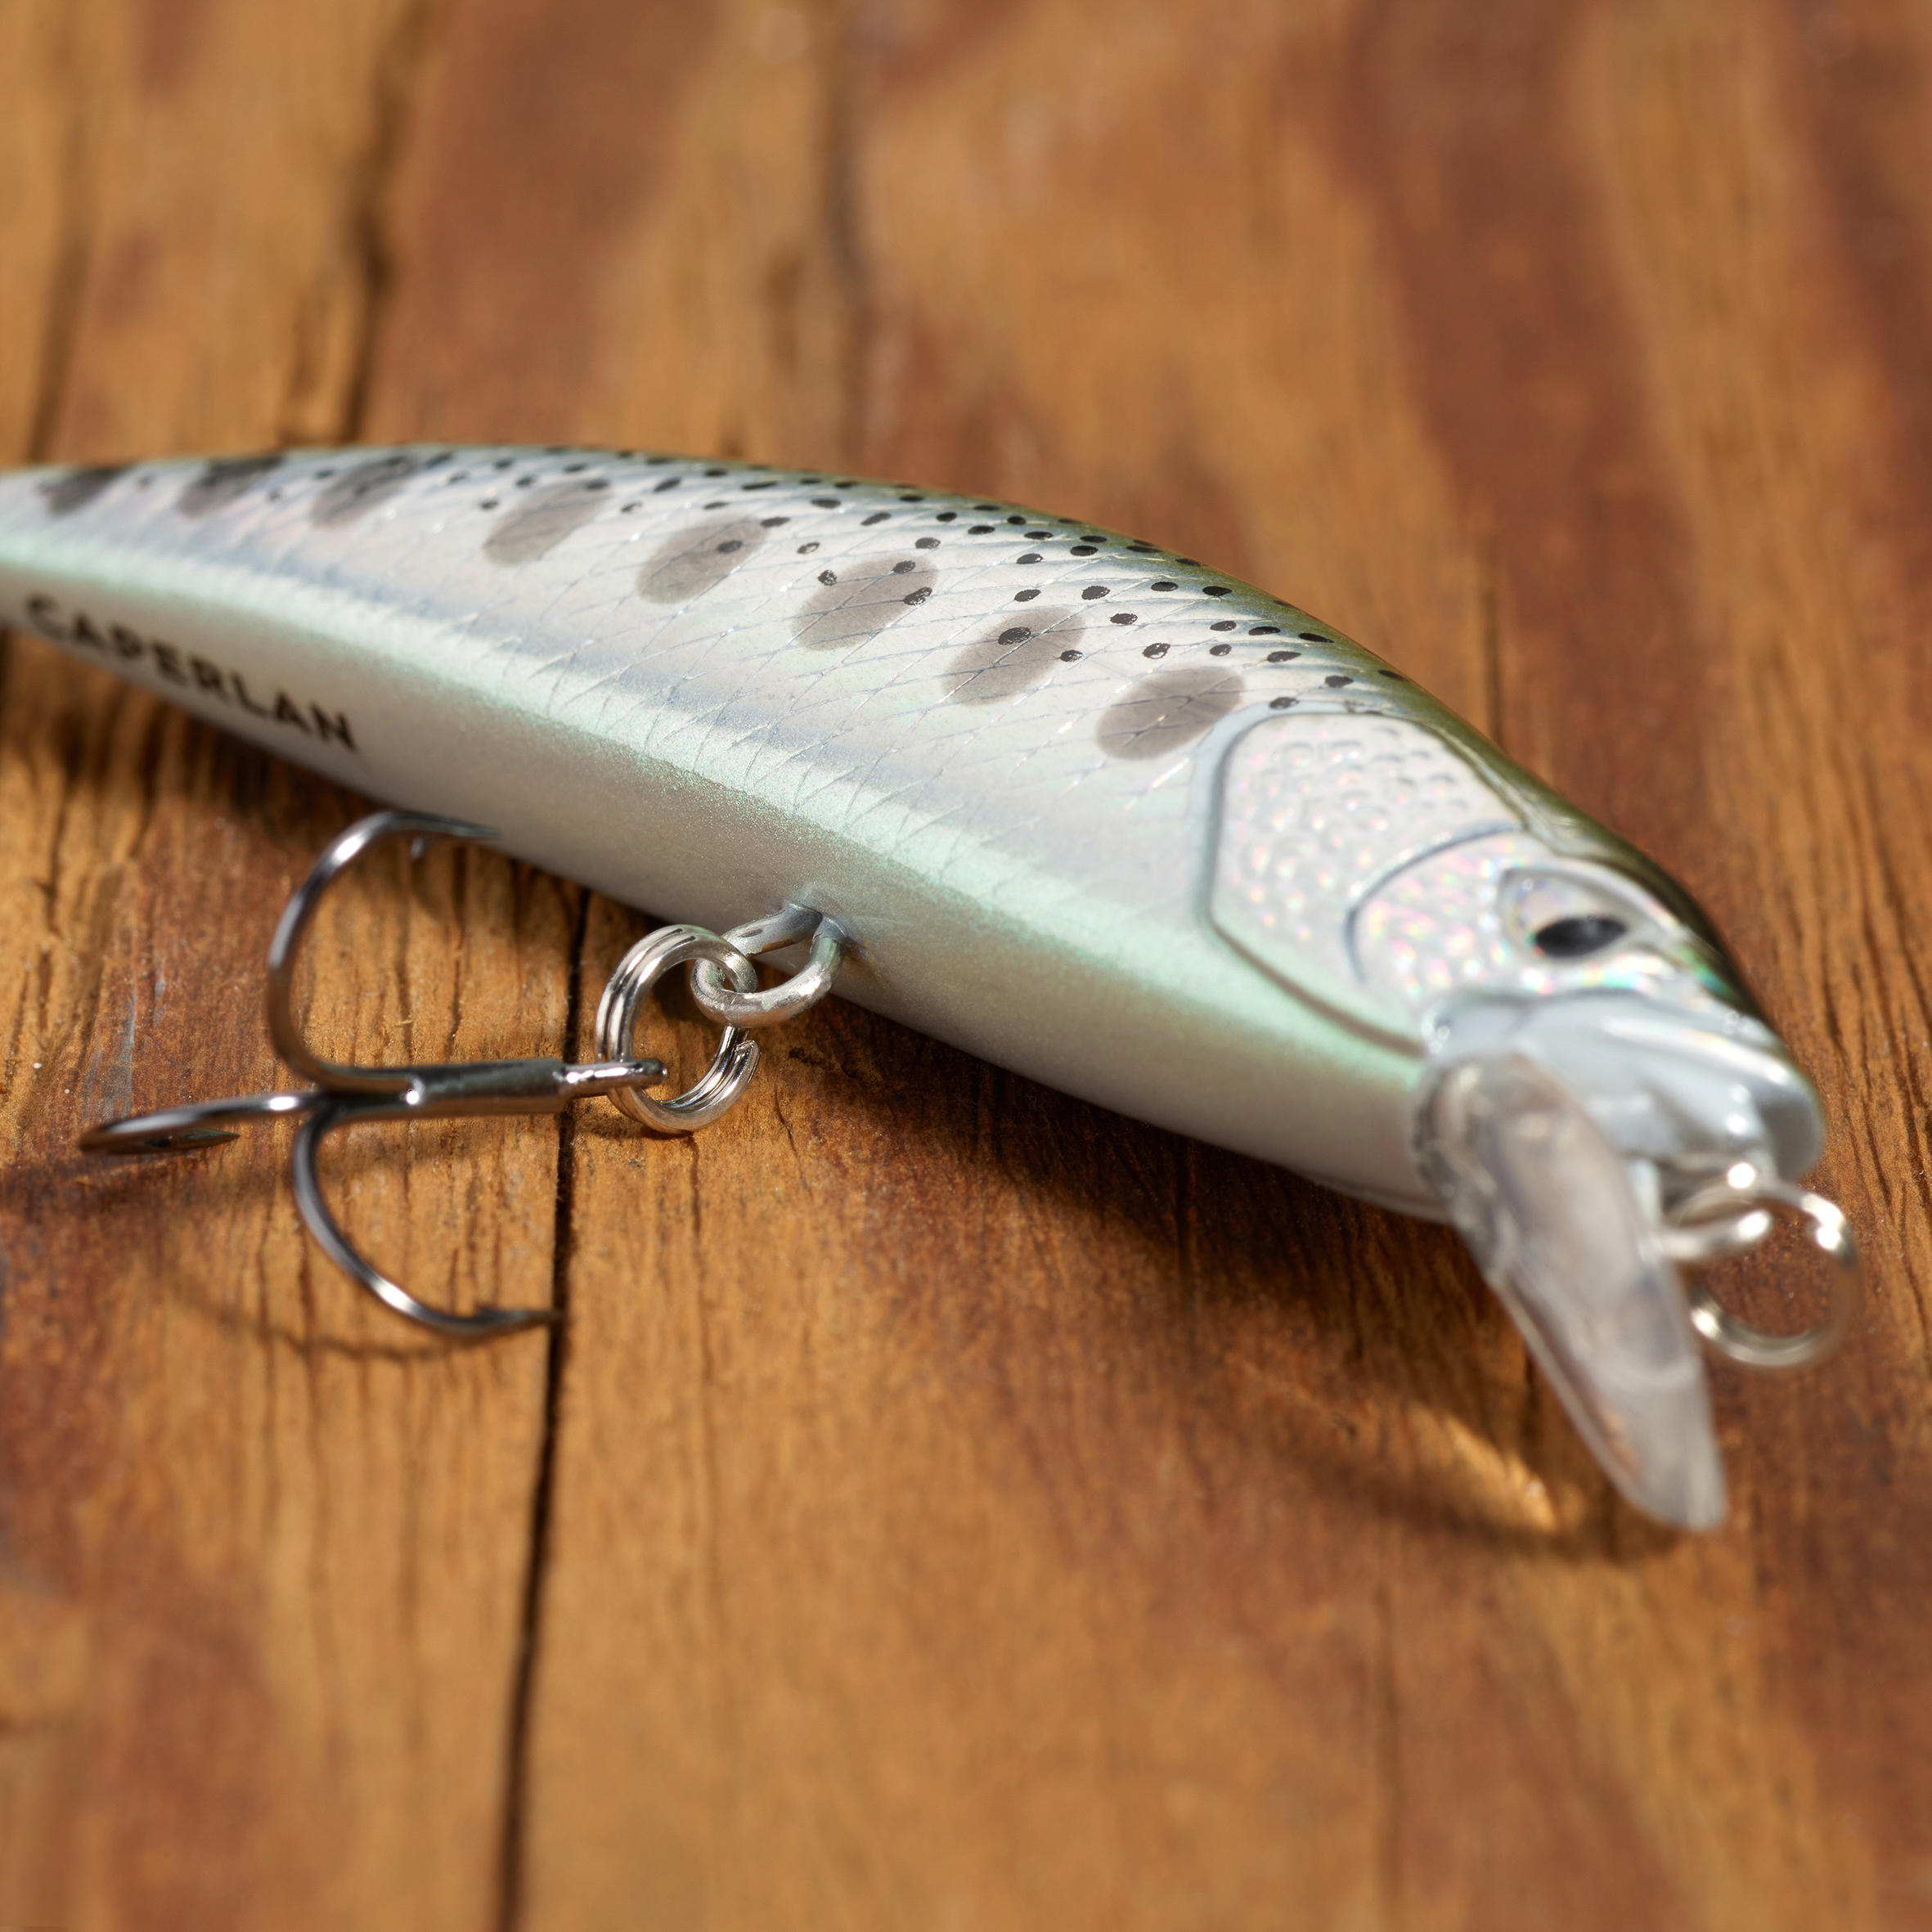 MINNOW HARD LURE FOR TROUT WXM  MNWFS US 50 YAMAME 3/4